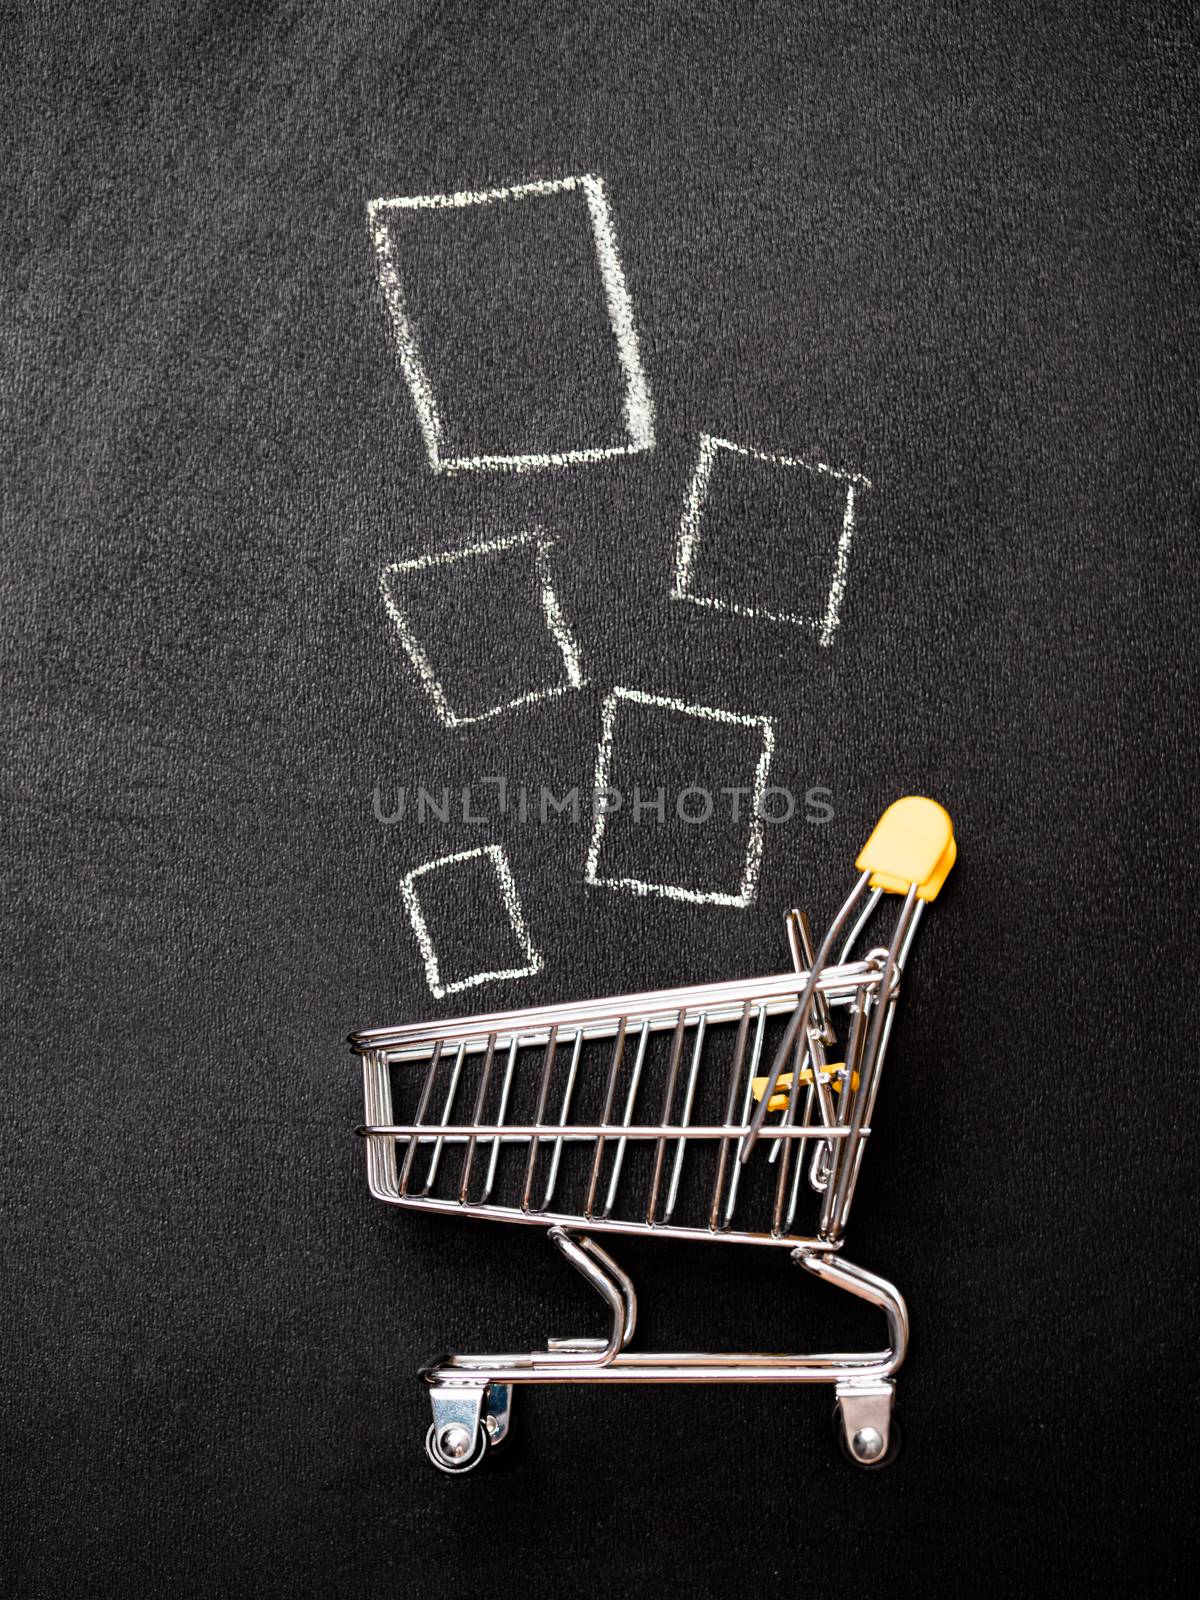 Shopping cart and products, vertical by fascinadora